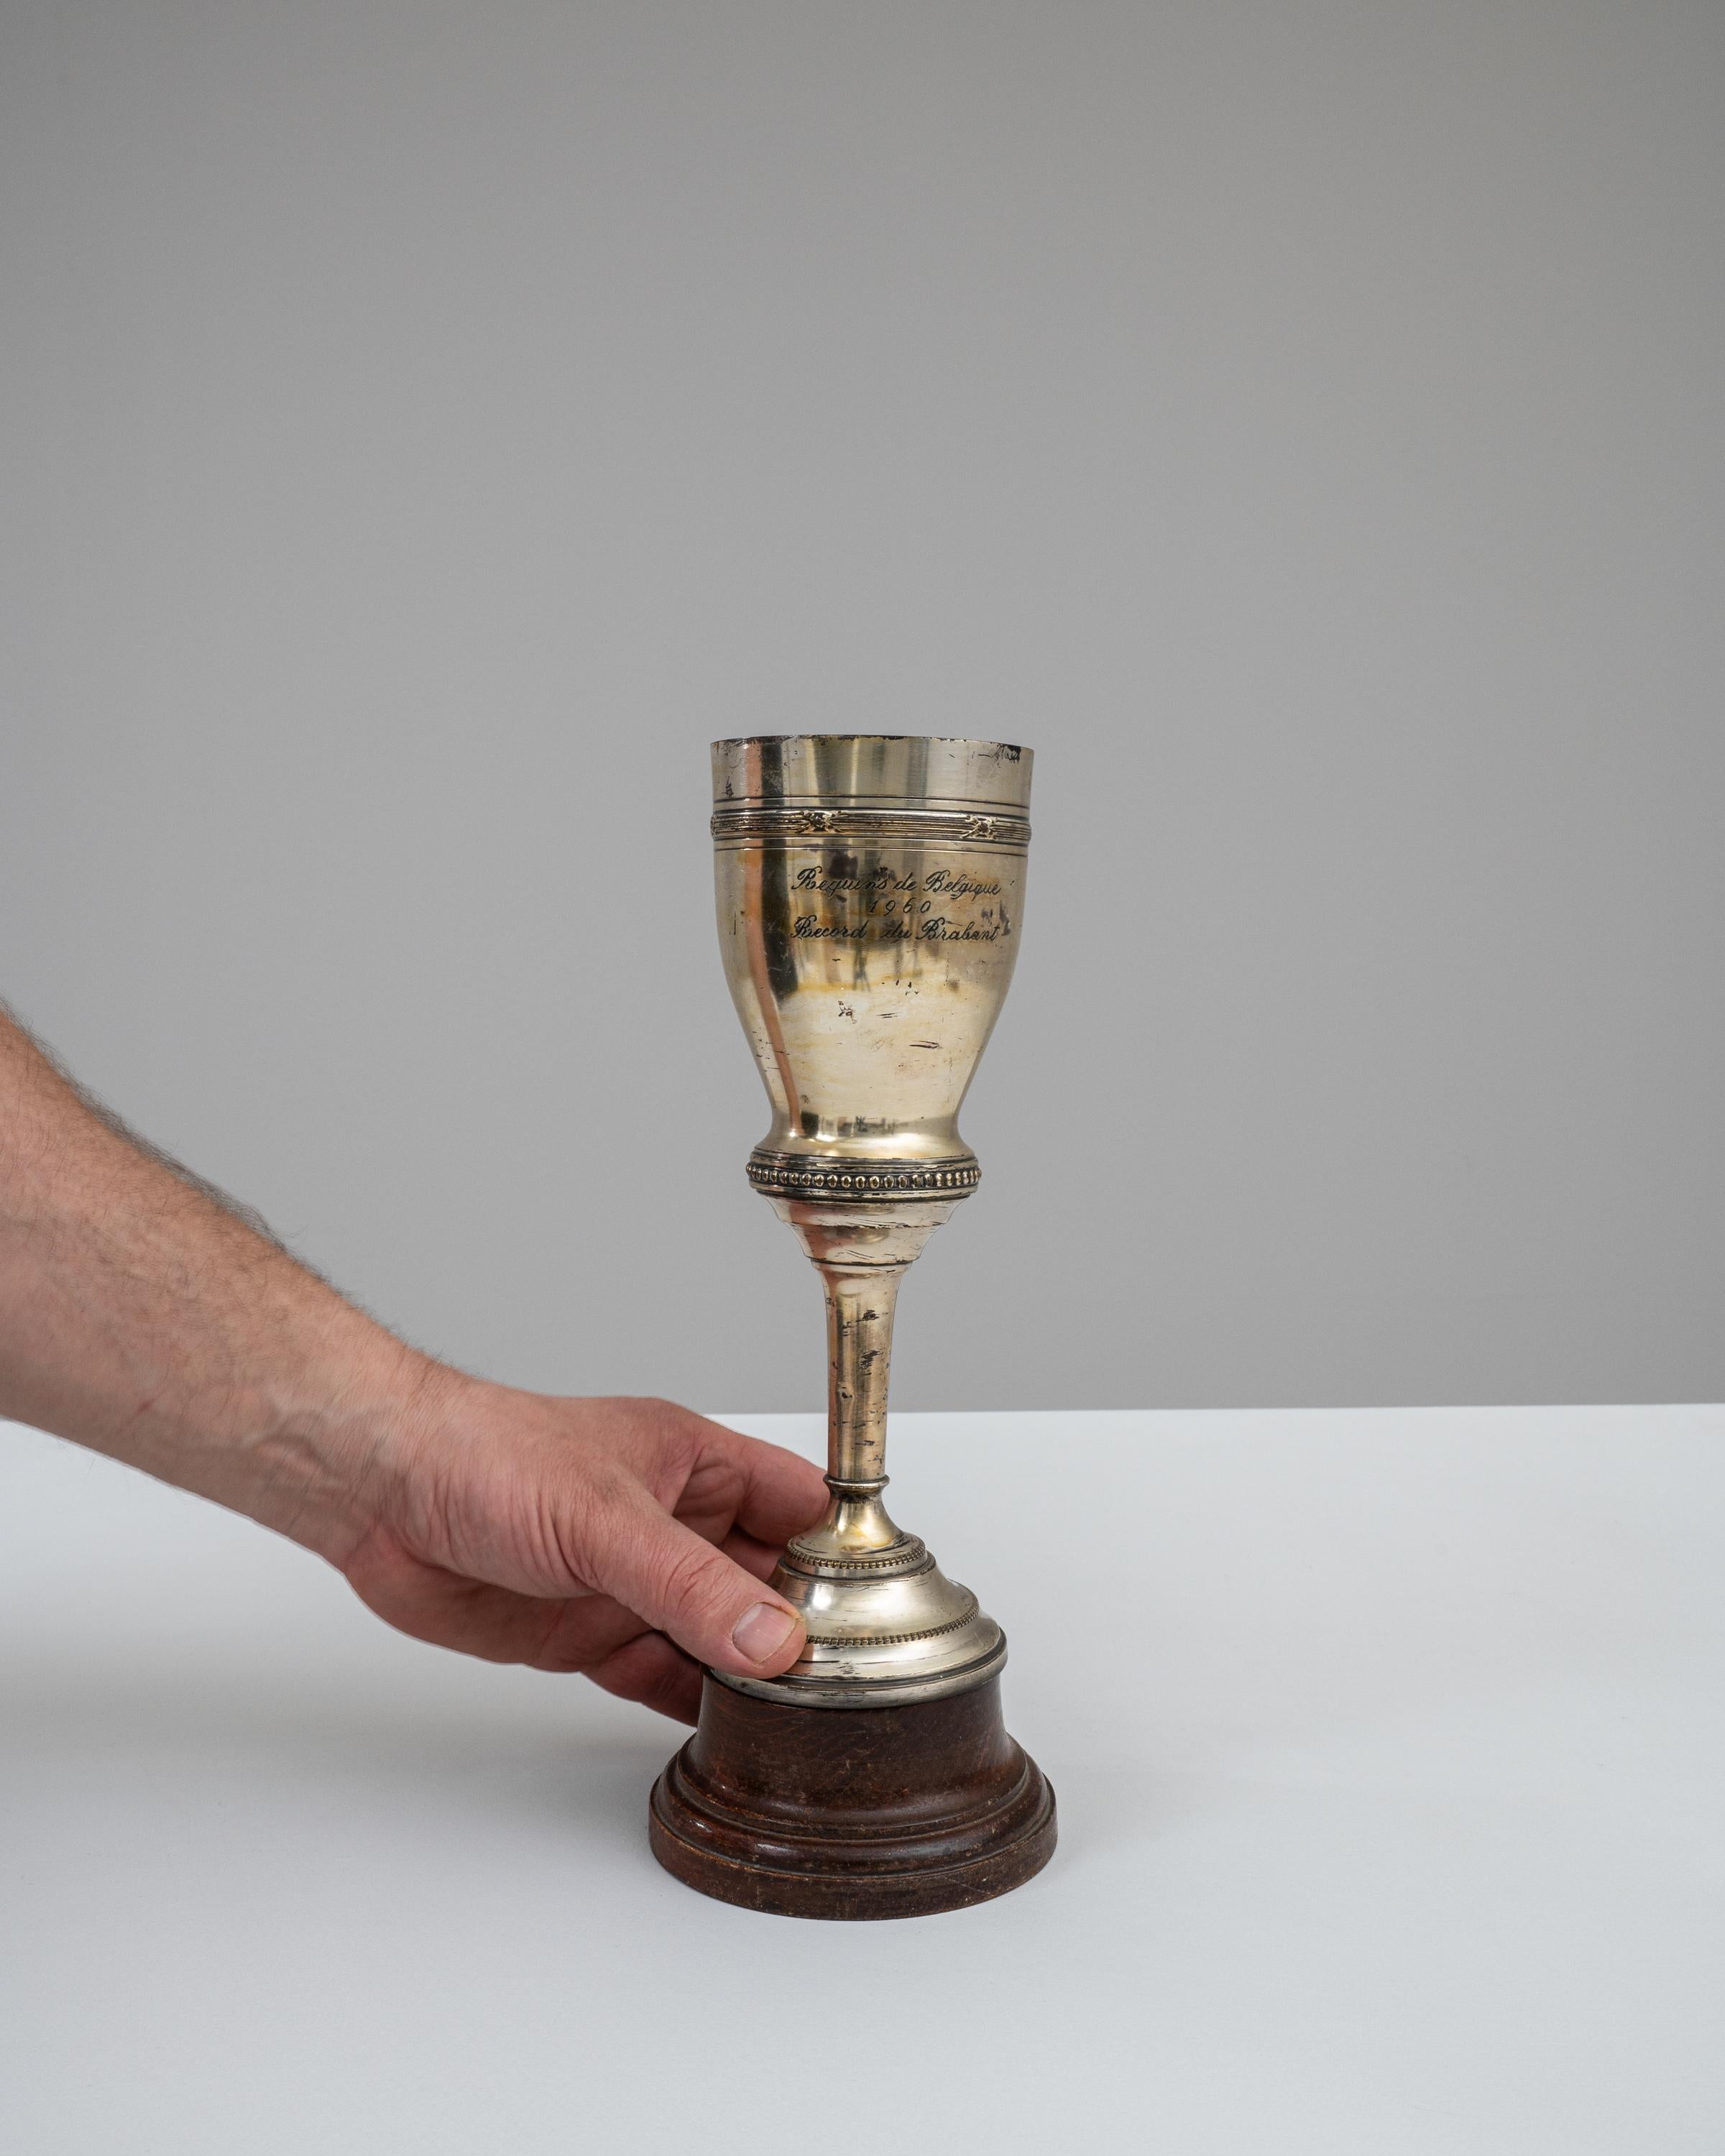 This 1960s Belgian Metal Goblet is a prestigious artifact, reflecting the competitive spirit of the era with its tarnished yet imposing presence. Awarded for a record-setting achievement as inscribed with 